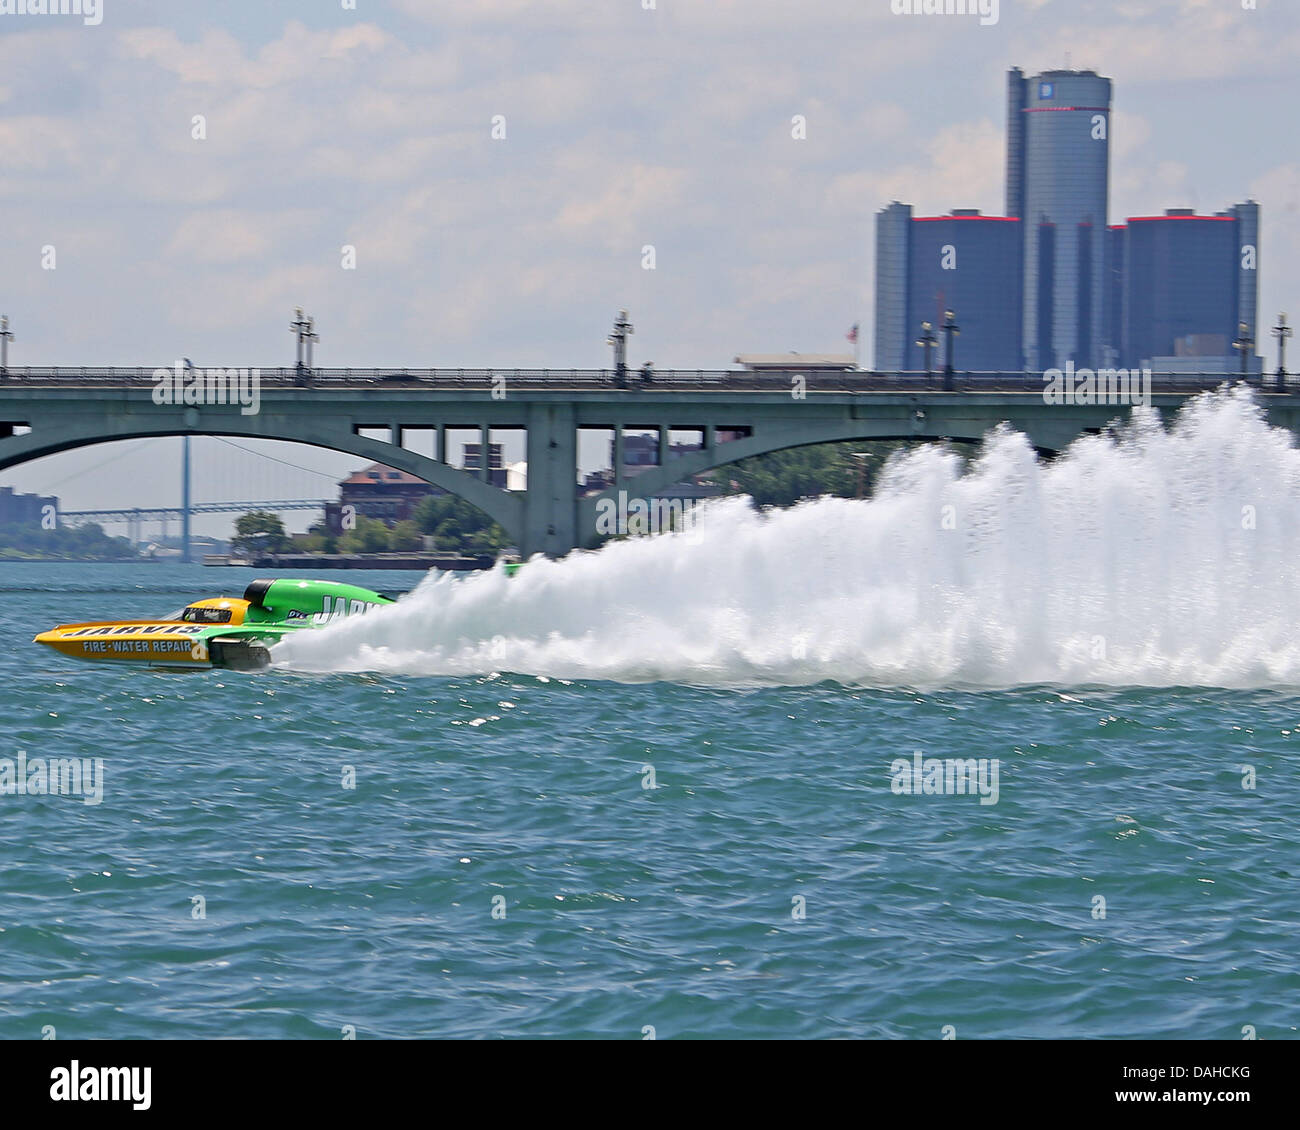 Detroit, MI, USA. 13th July, 2013. Greg Hopp (14) pilots his Jarvis Fire Water Repair boat past the Belle Isle bridge and the Detroit skyline during heat 1a on the Detroit River on July 13, 2013 in Detroit, Michigan. Tom Turrill/CSM/Alamy Live News Stock Photo